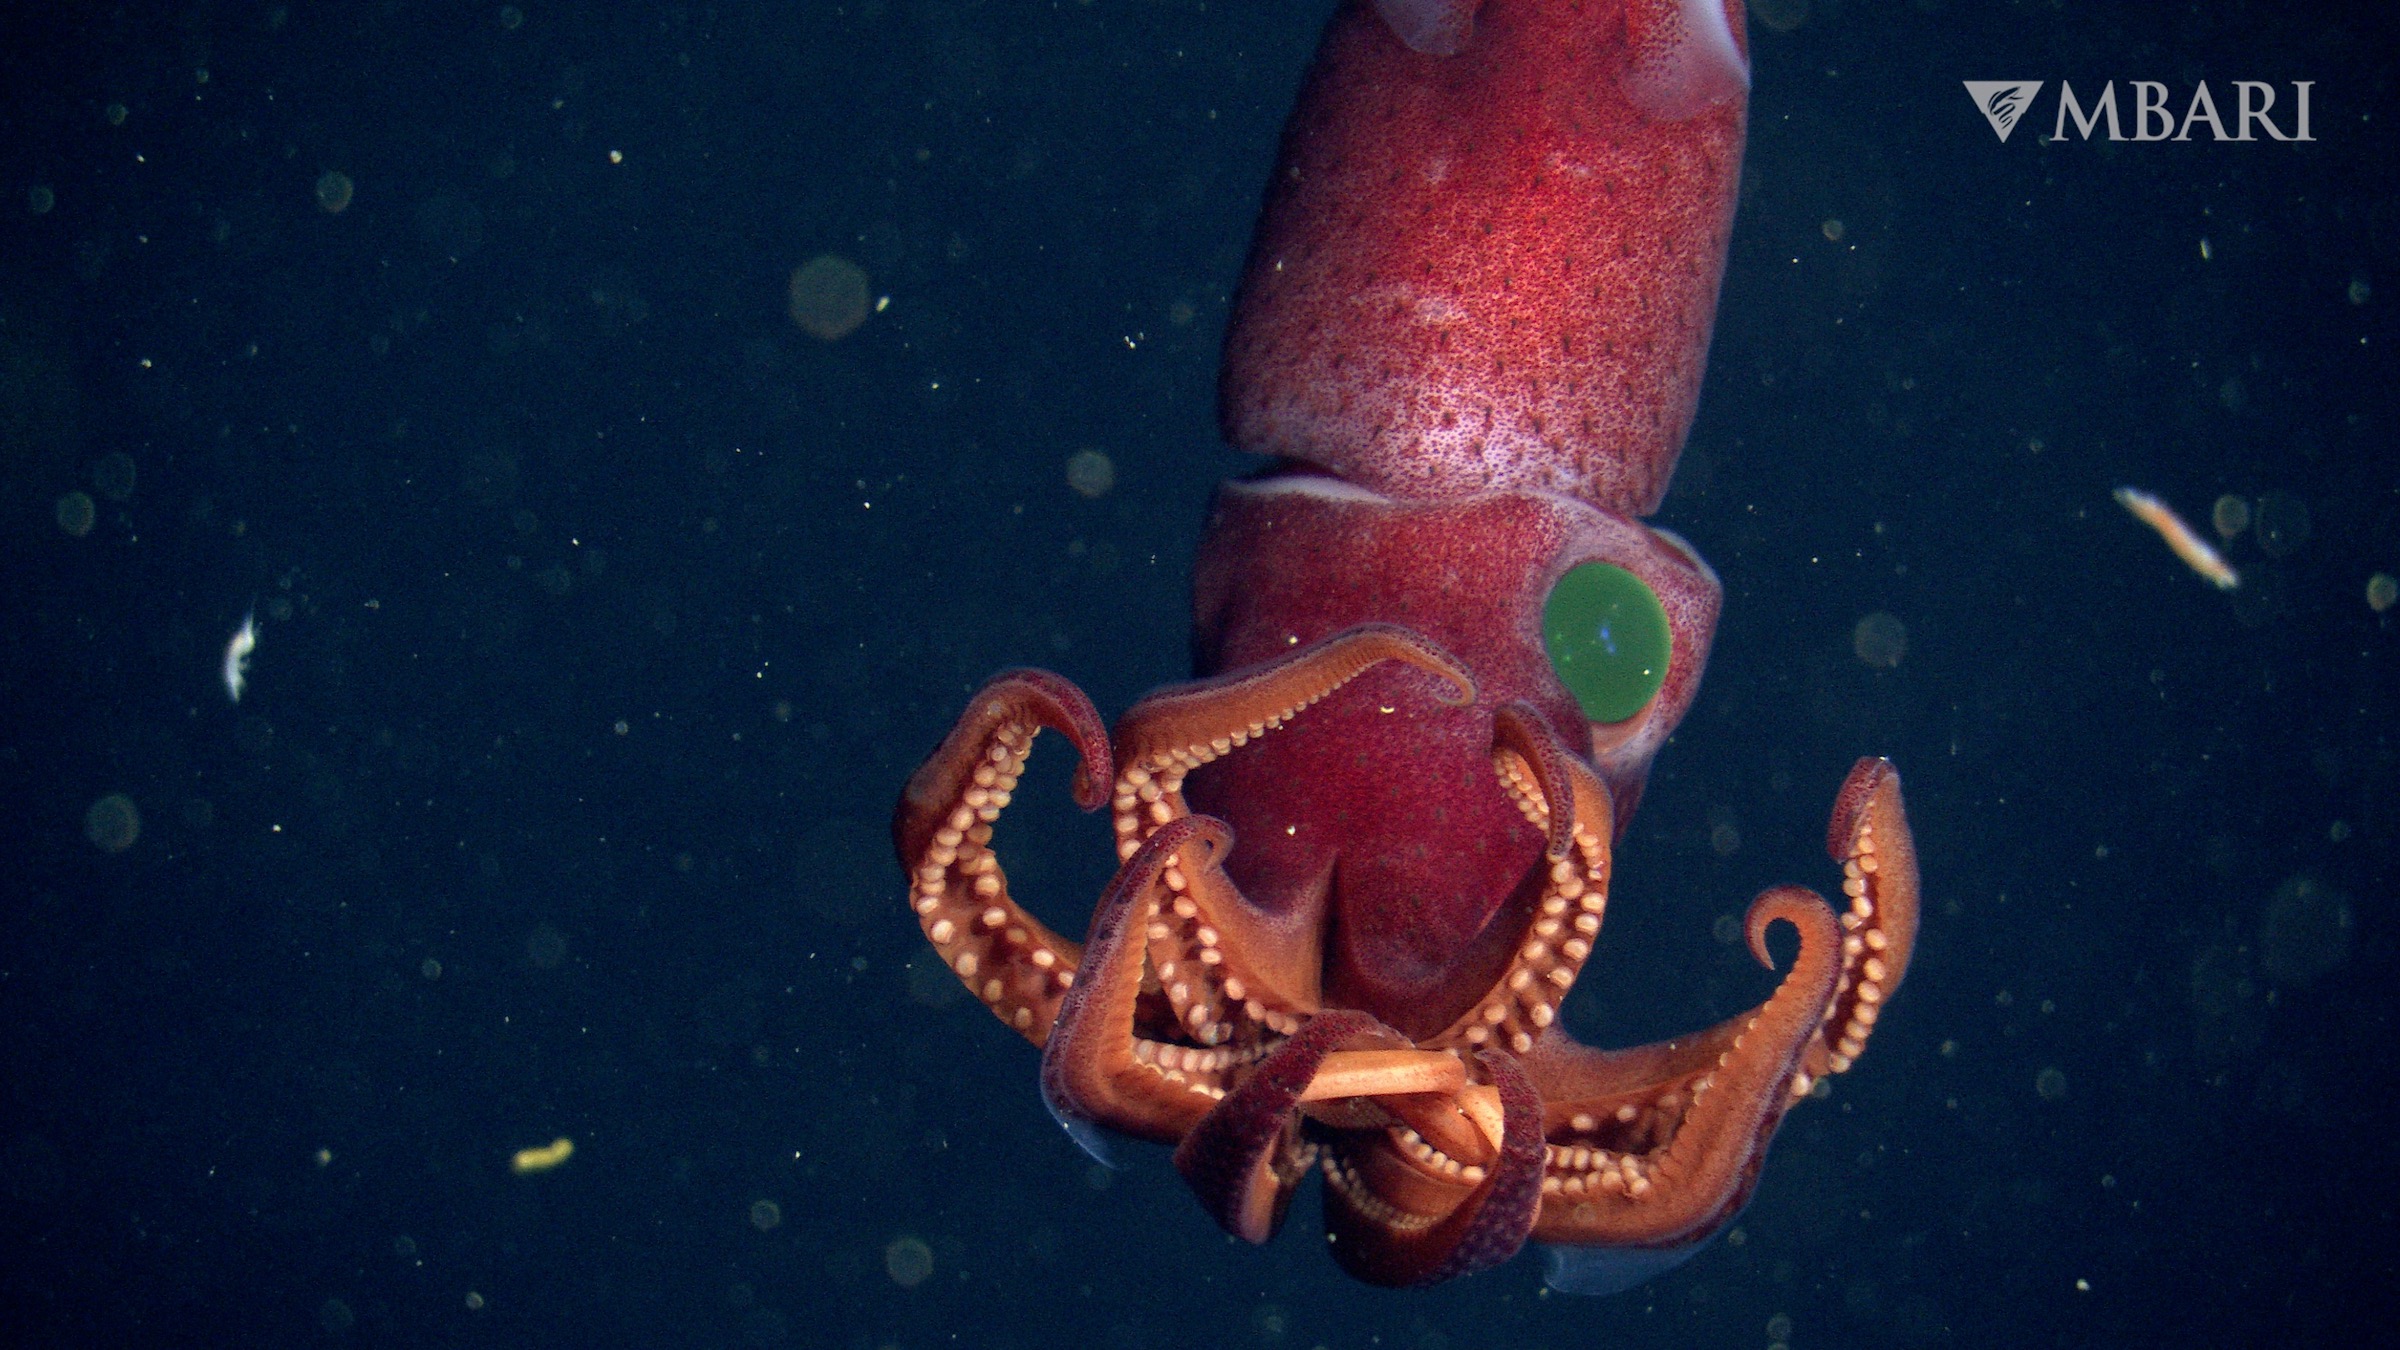 The cockeyed squid's big left eye looks upward while its small right eye looks downward.